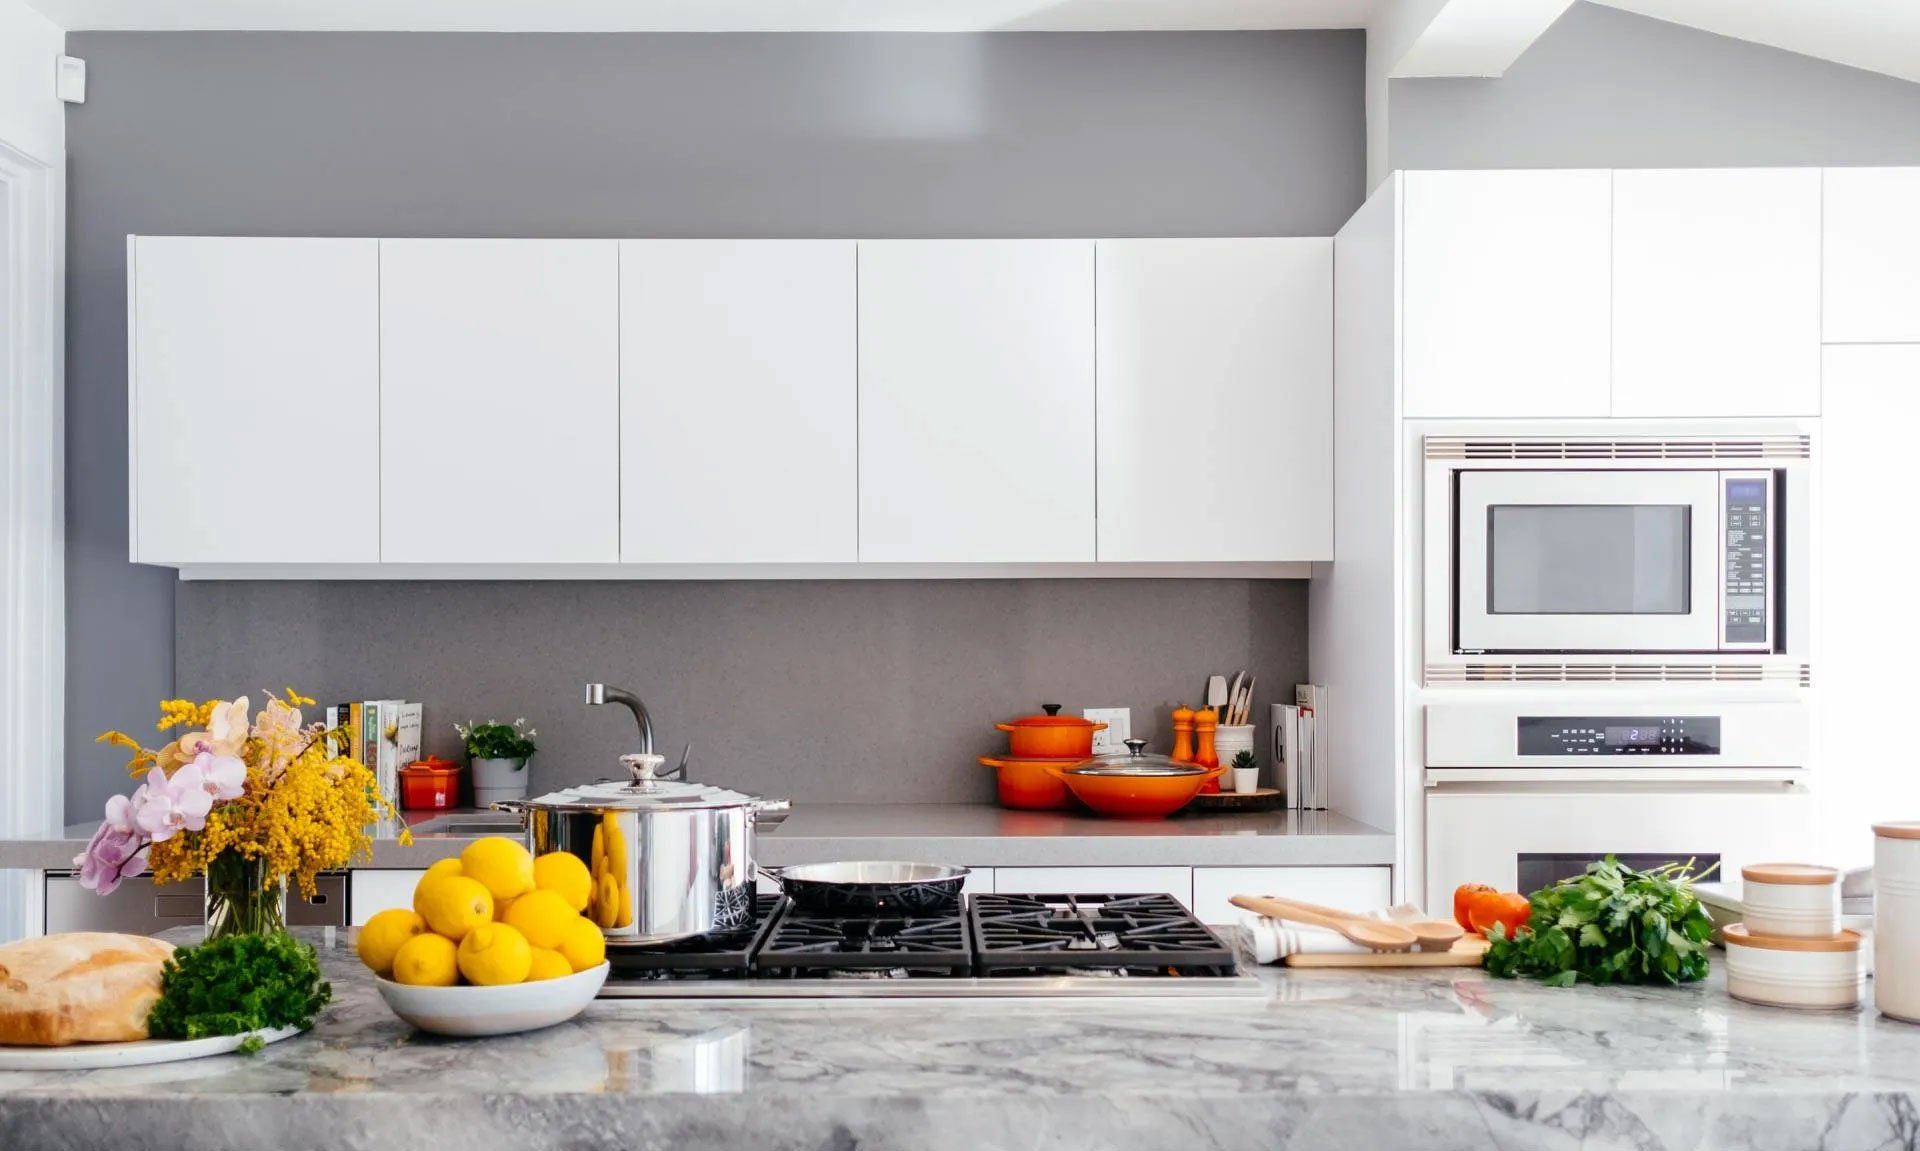 Why you should invest in professional kitchen remodeling services